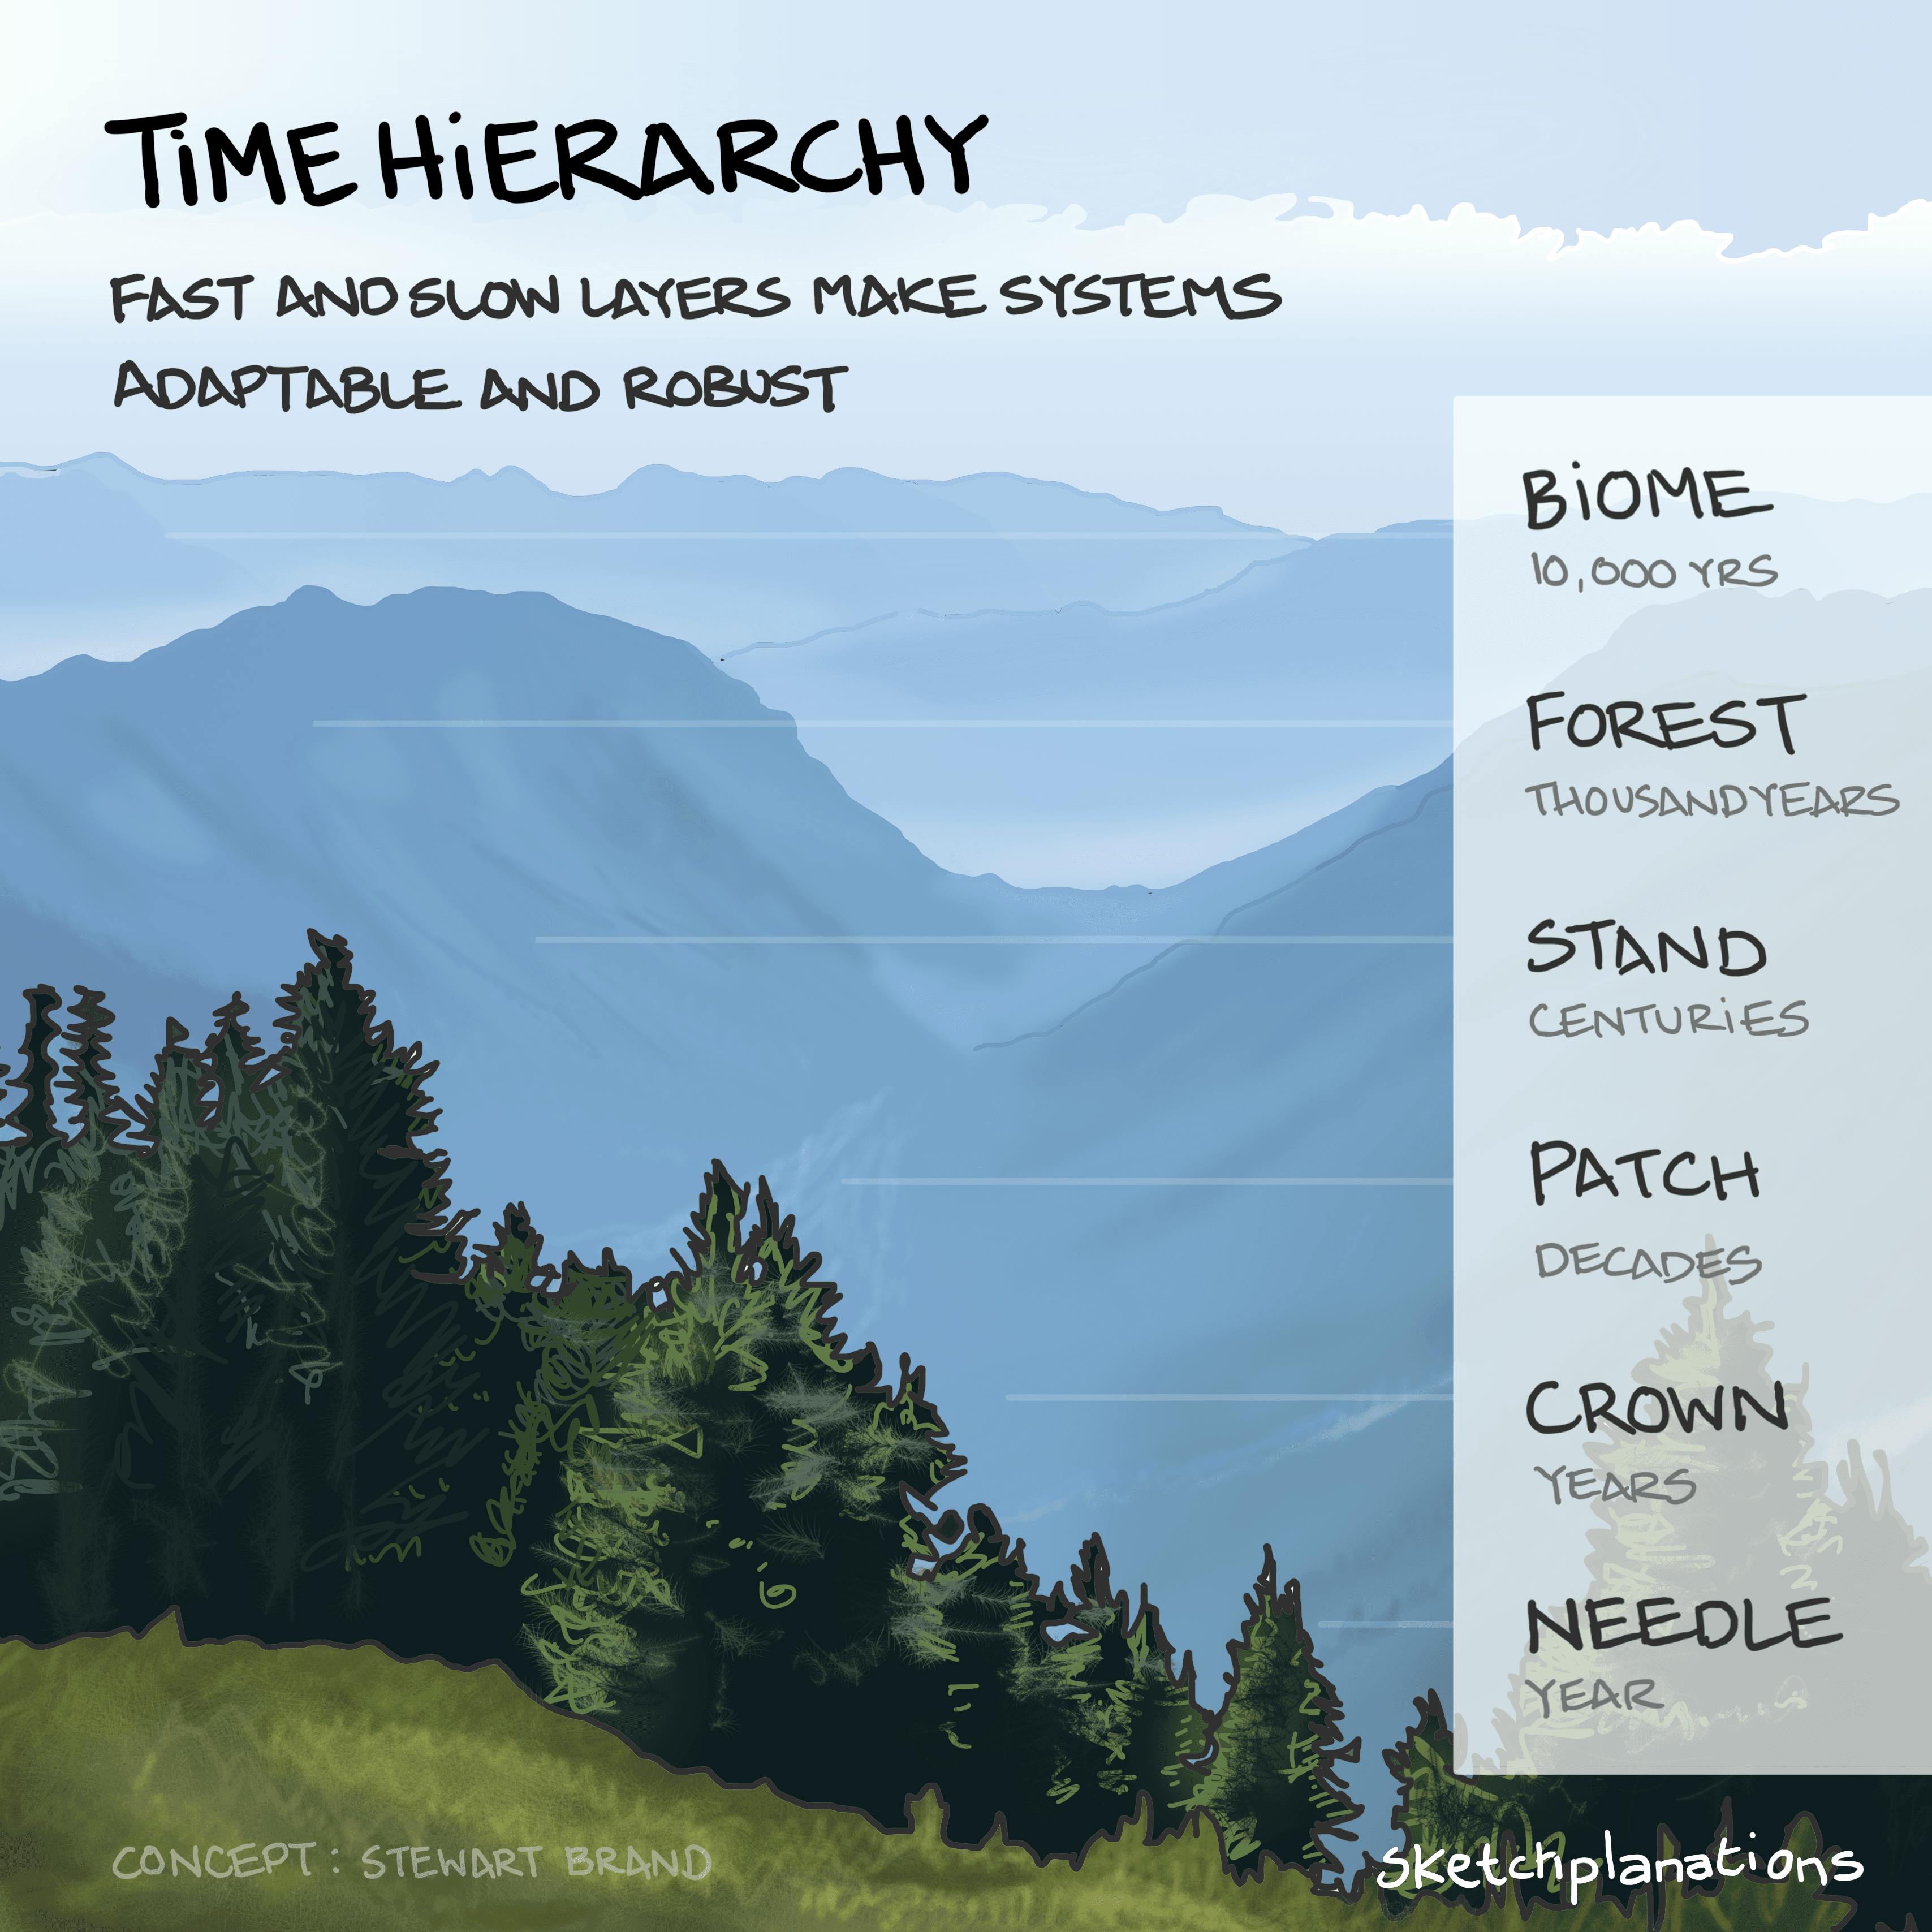 Time Hierarchy illustration: a lush, verdant, coniferous alpine forest is depicted as a means of explaining the range of layers within any durable system that develop at different speeds. From the individual needles on the trees that develop over a year, to the surrounding biome, 10,000 years in the making. 